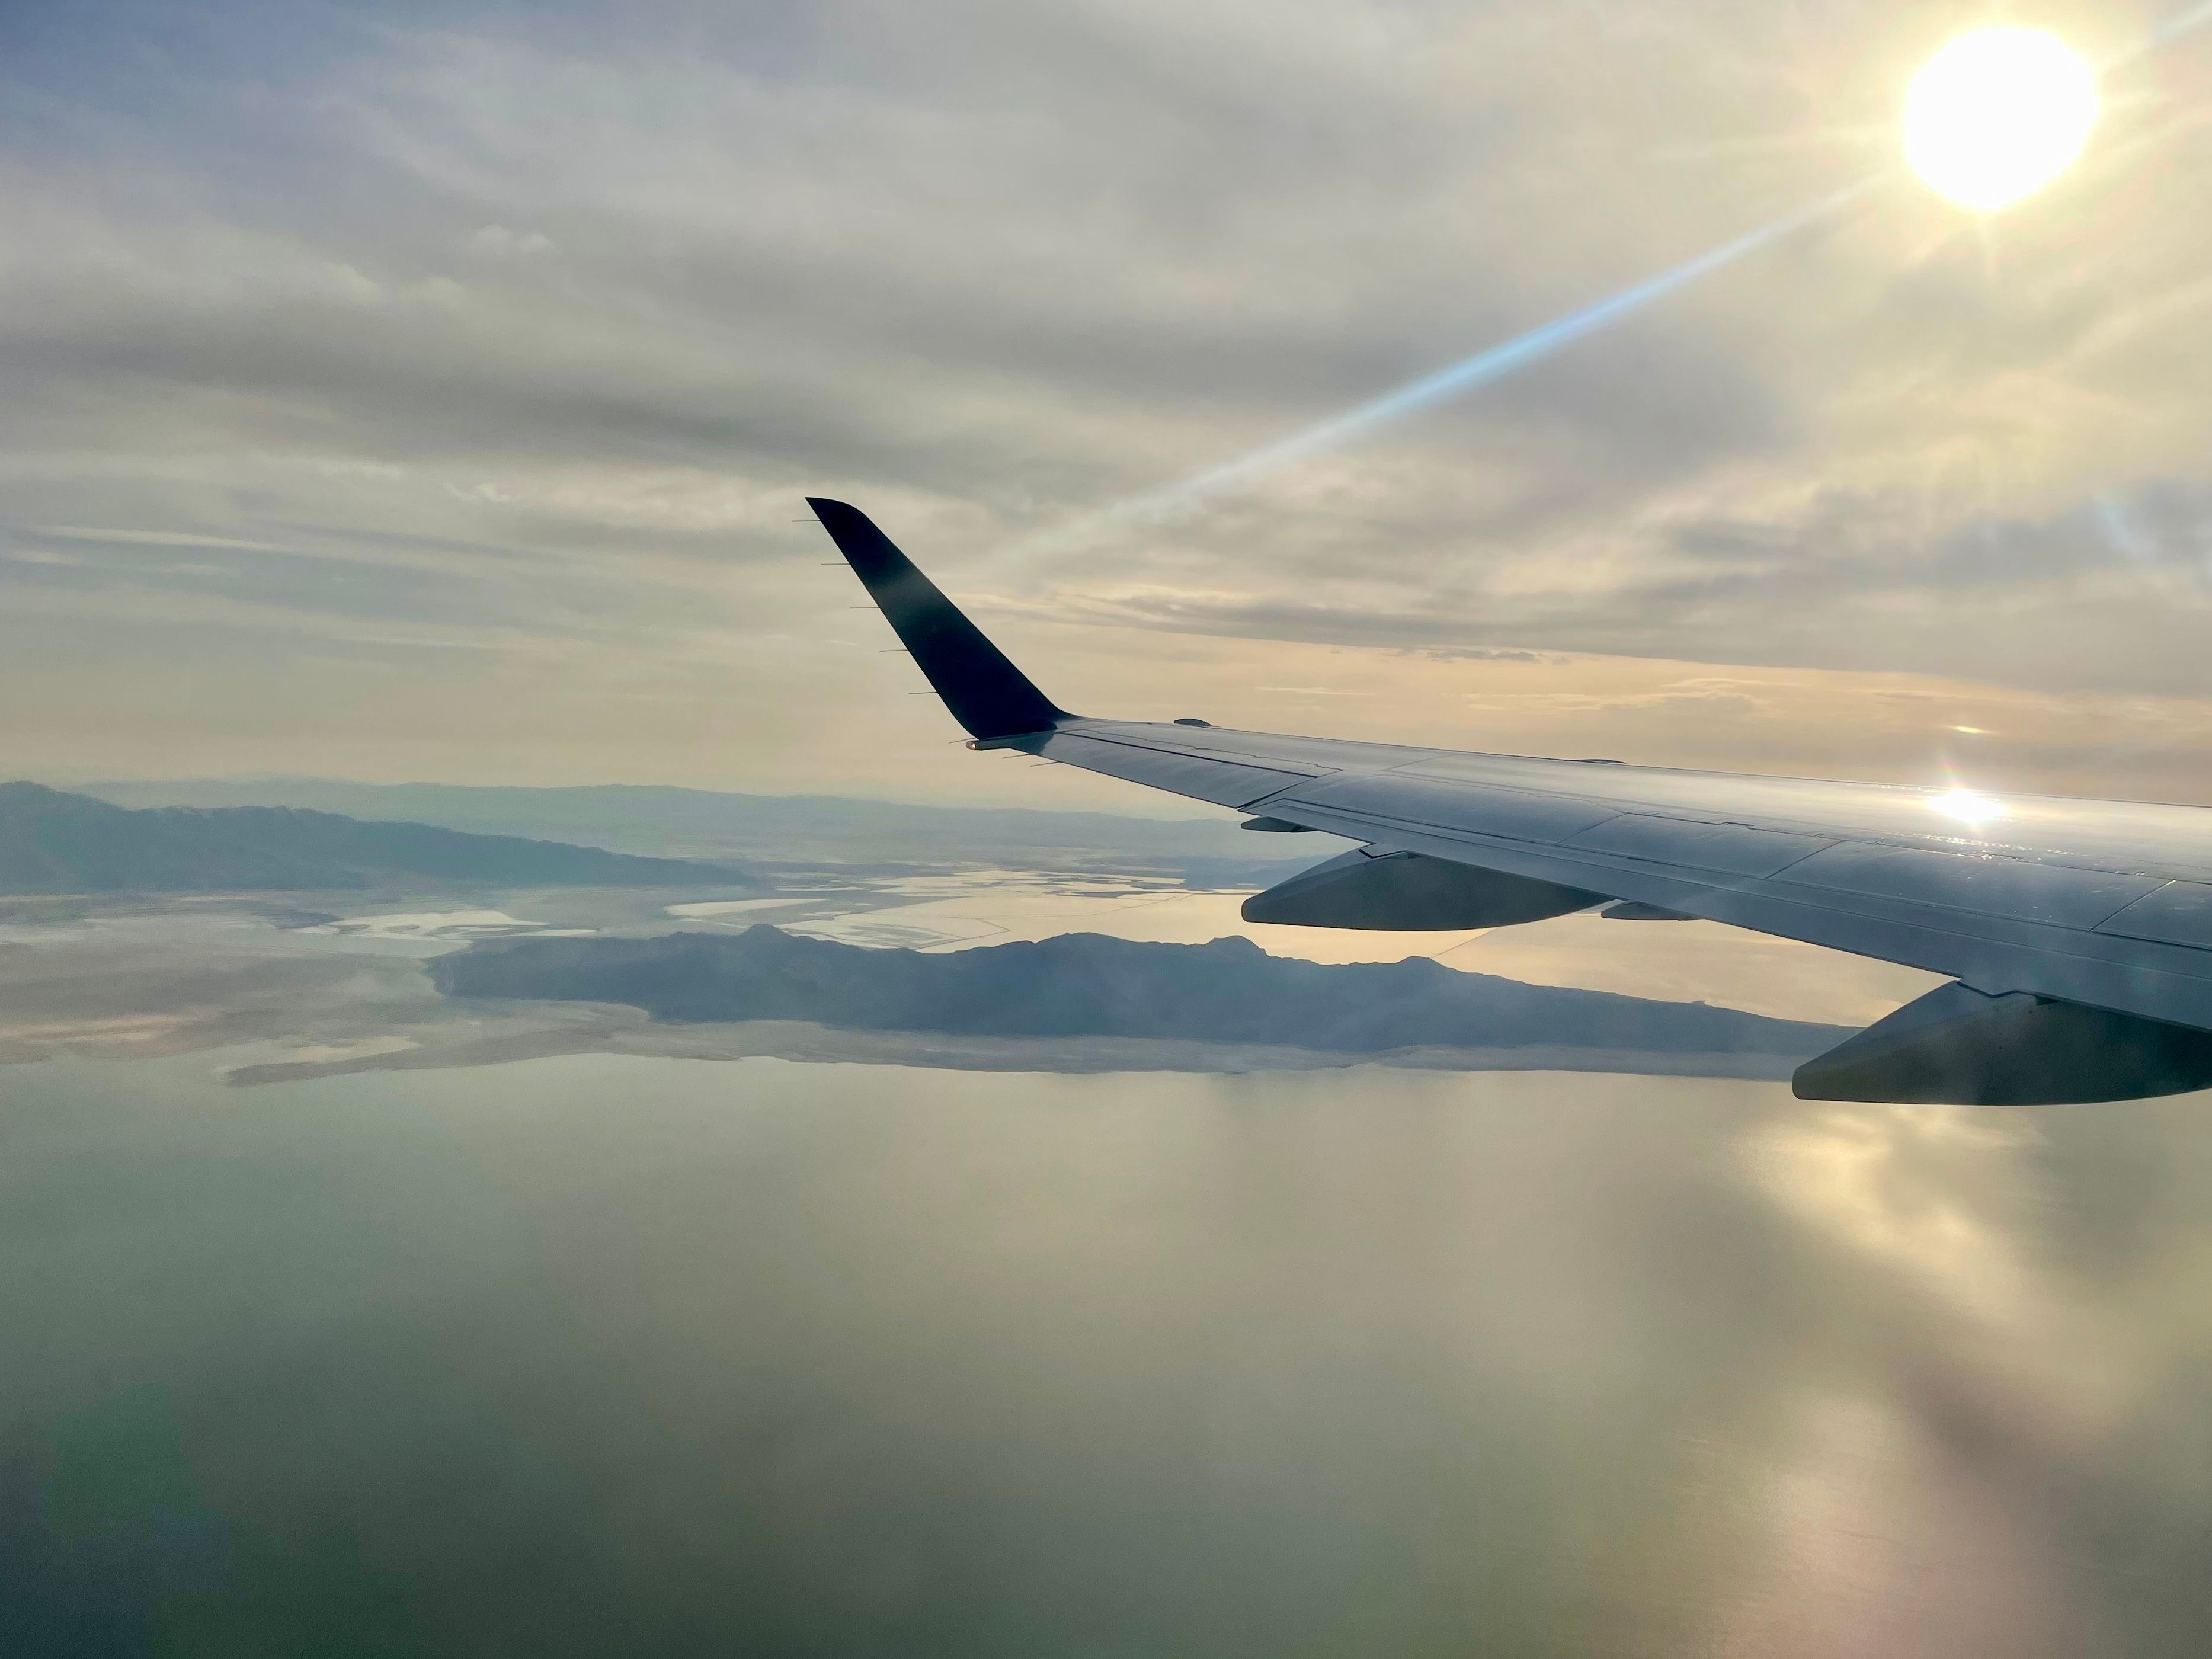 The Great Salt Lake seen from outside a passenger aircraft window.